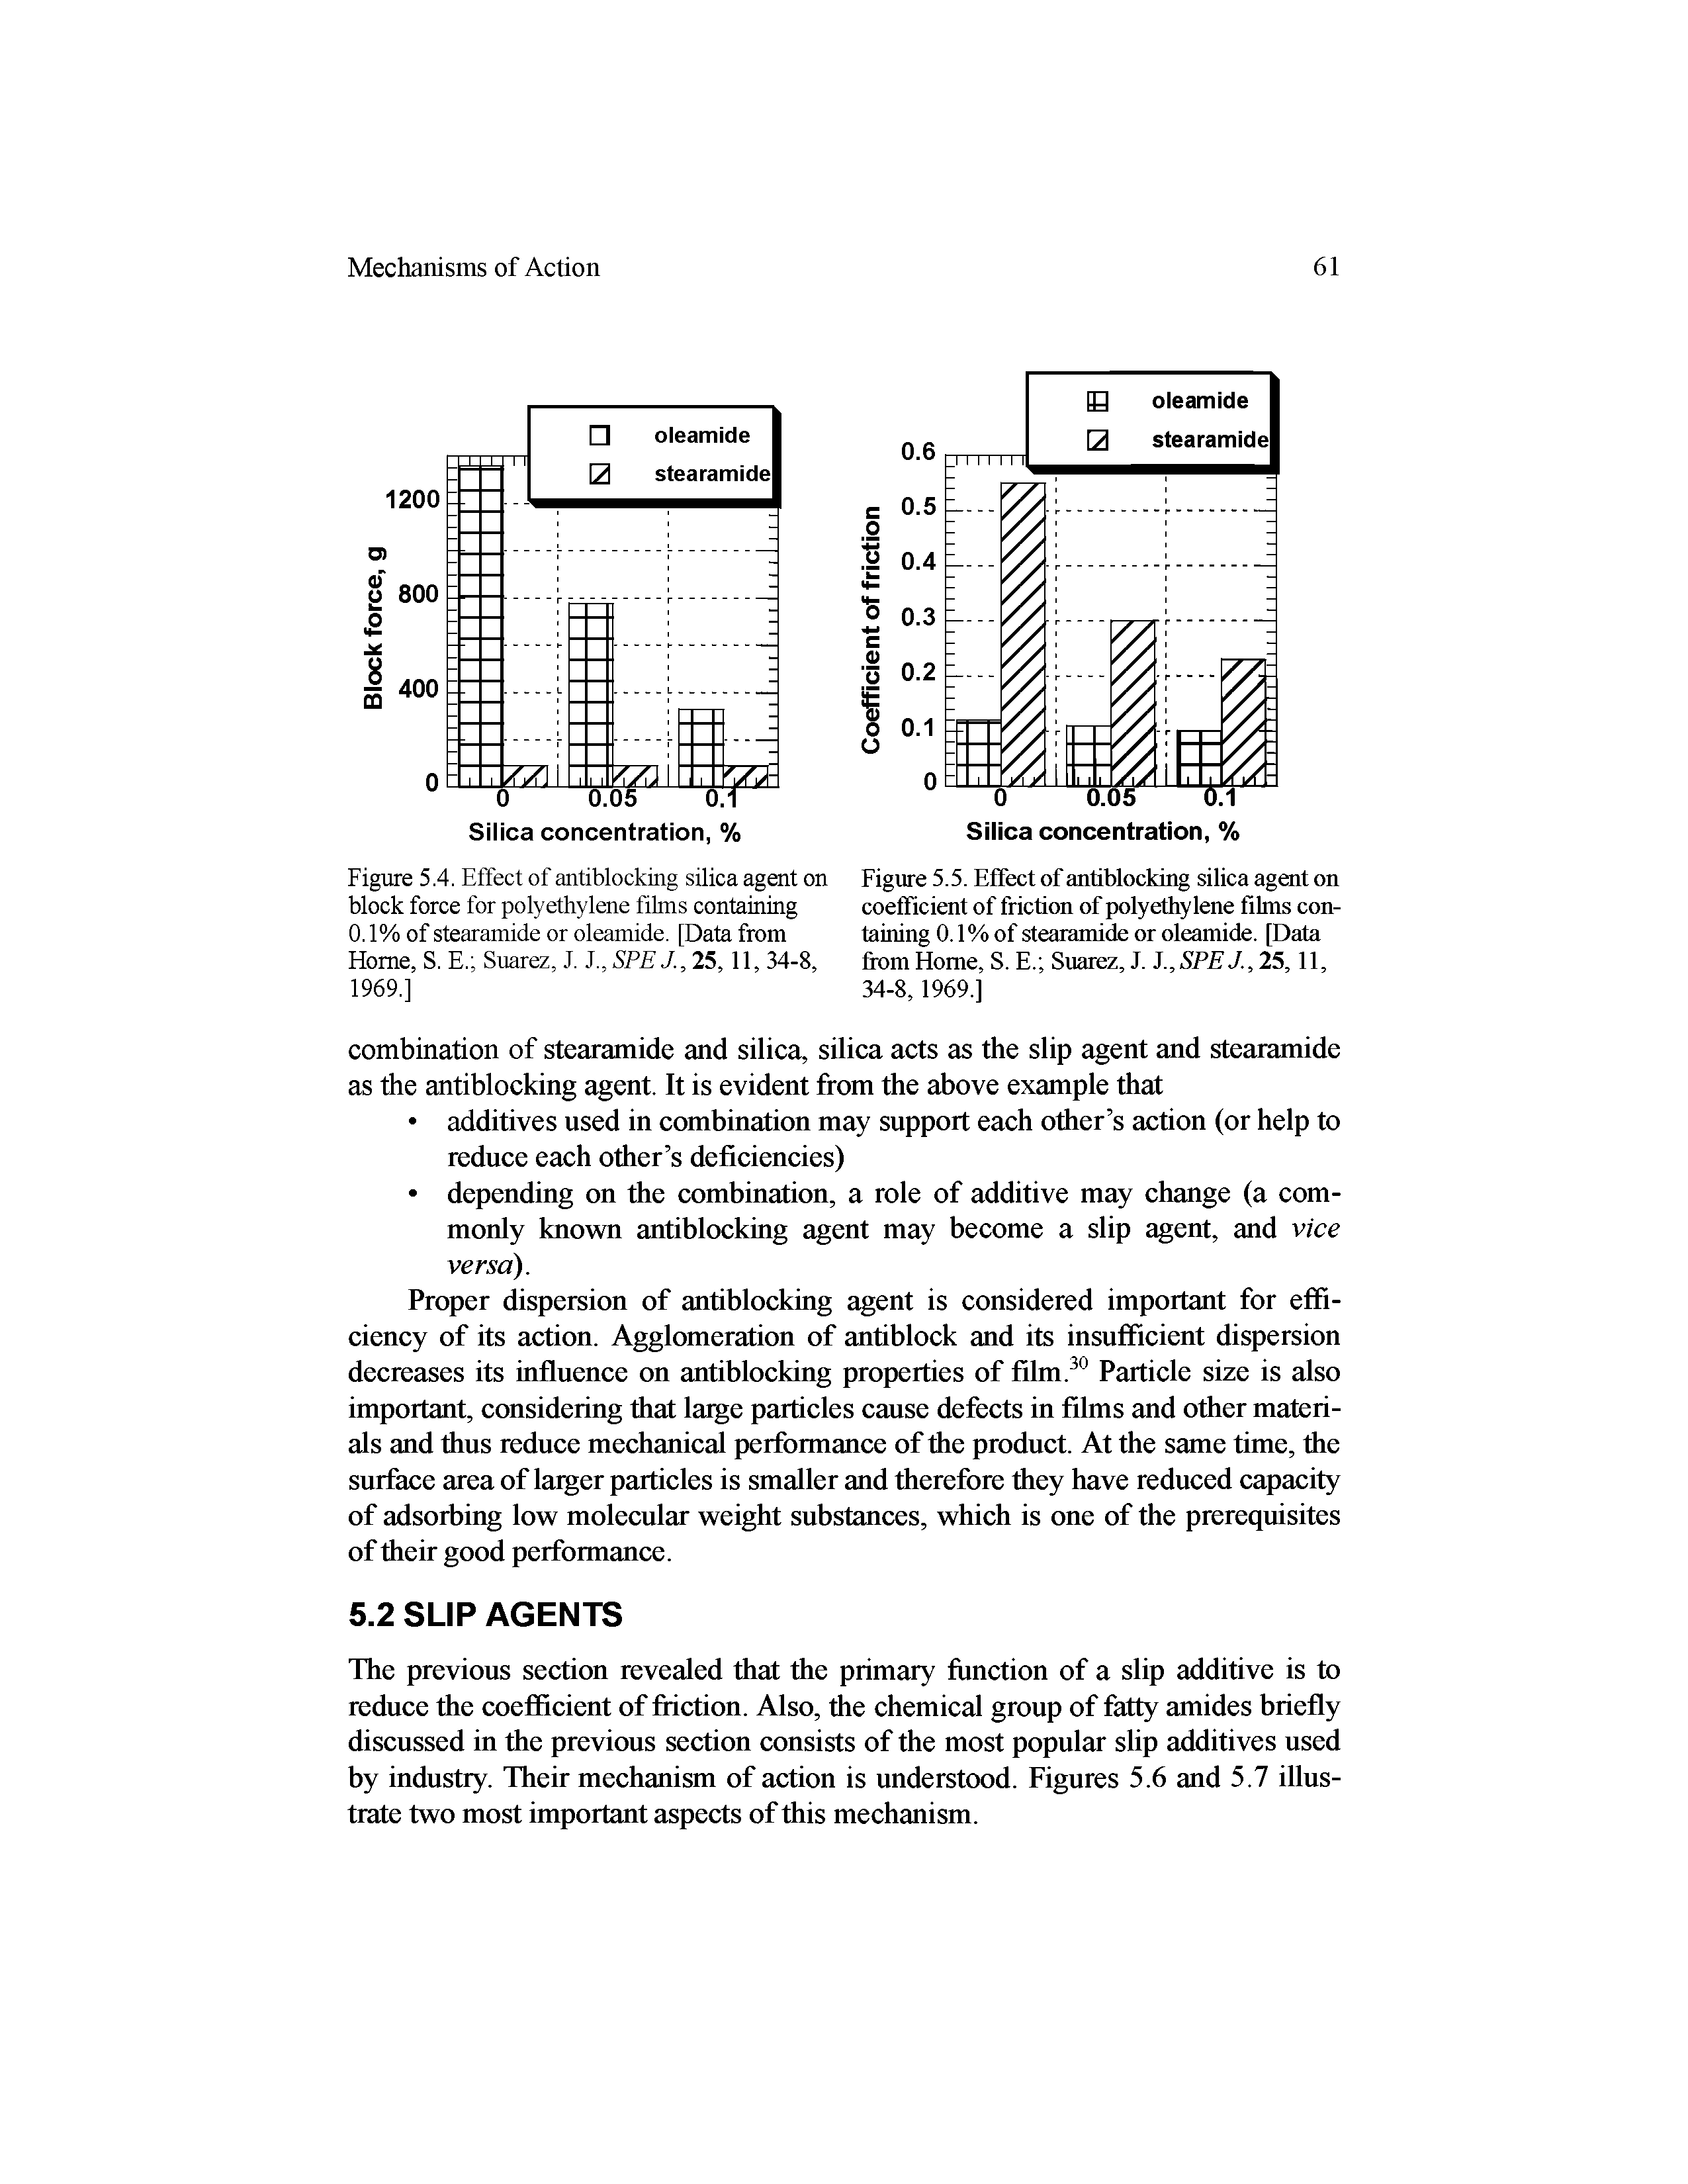 Figure 5.4. Effect of antiblocking silica agent on block force for polyethylene films containing 0.1% of stearamide or oleamide. [Data from Home, S. E. Suarez, J. I, SPEJ., 25,11,34-8, 1969.]...